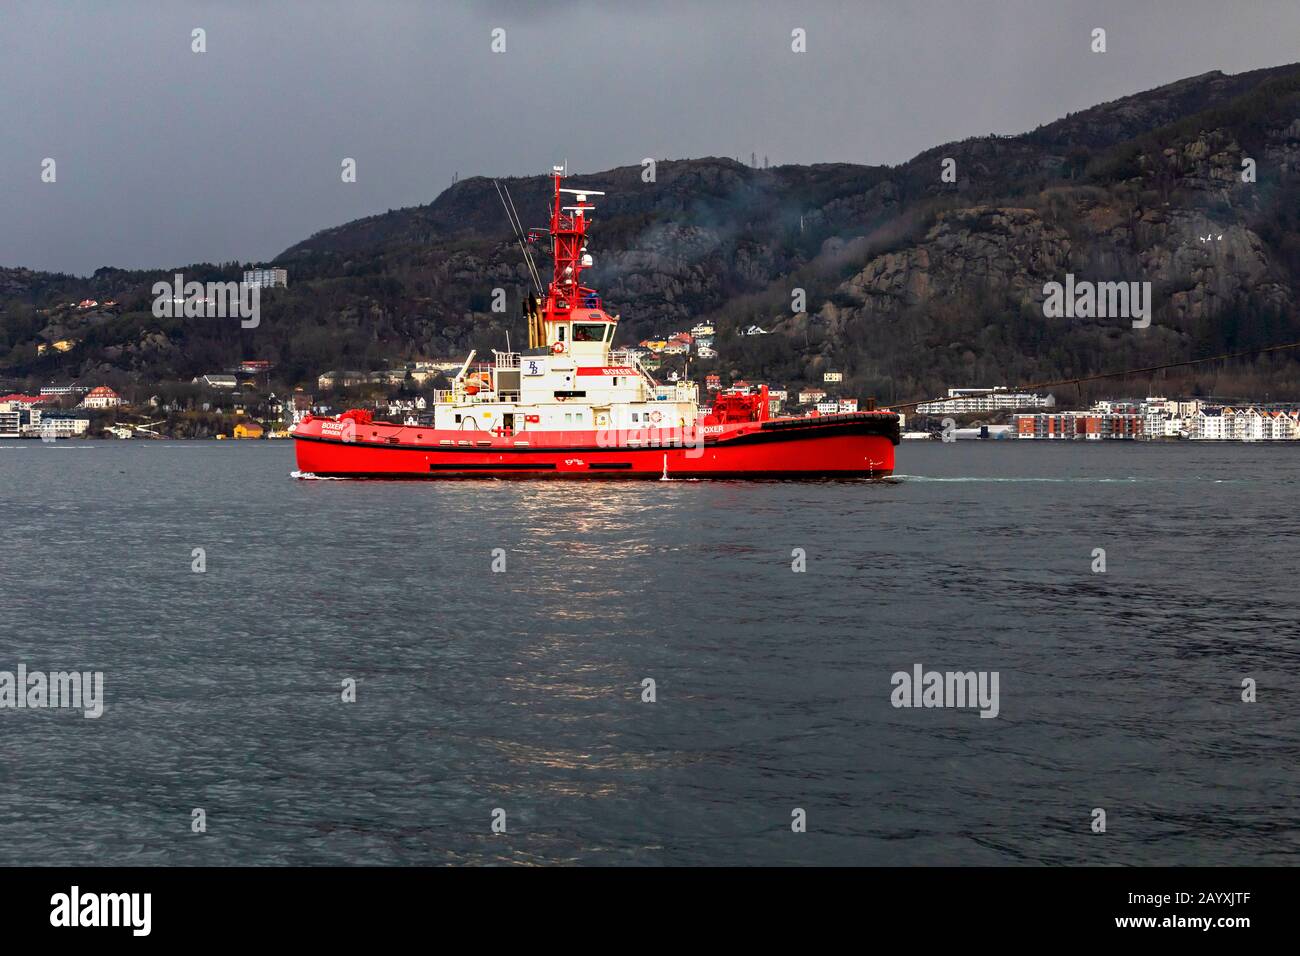 Tug boat Boxer at Byfjorden, outside port of Bergen, Norway. Assisting a departing vessel Stock Photo